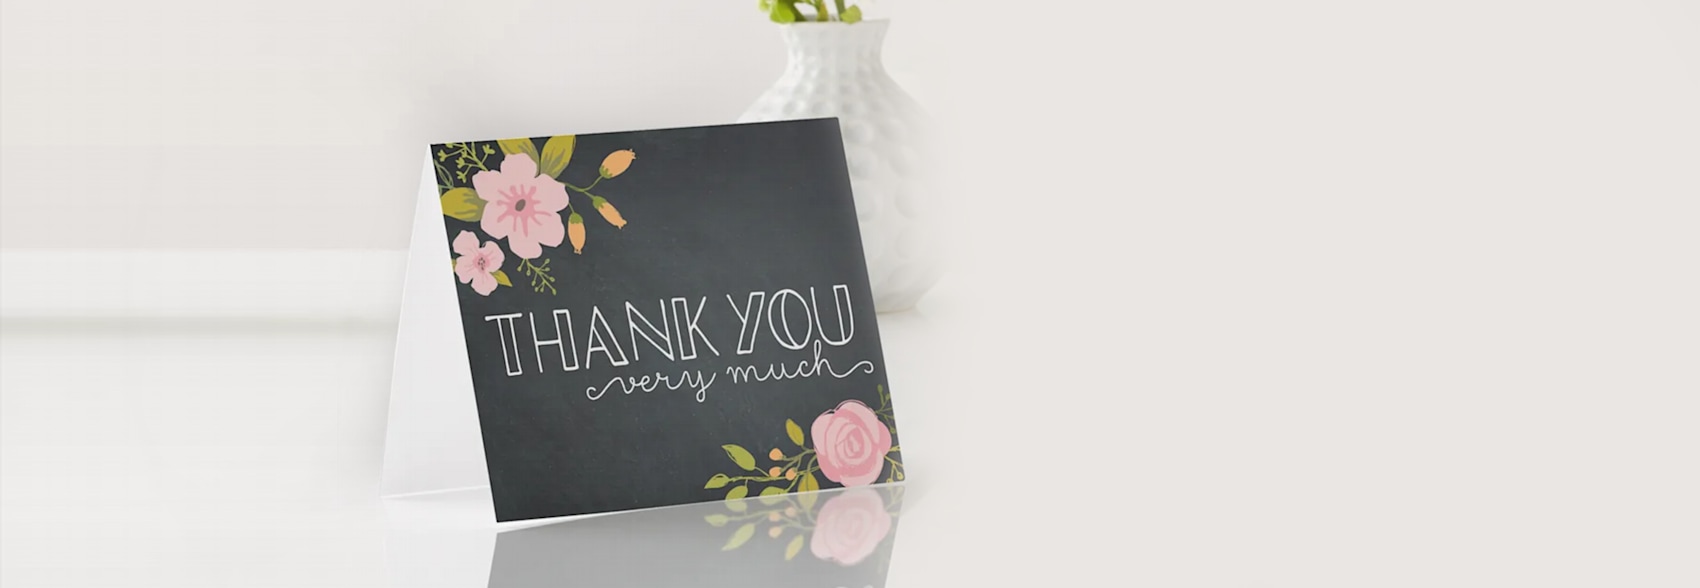 Larger version: Thank You Cards